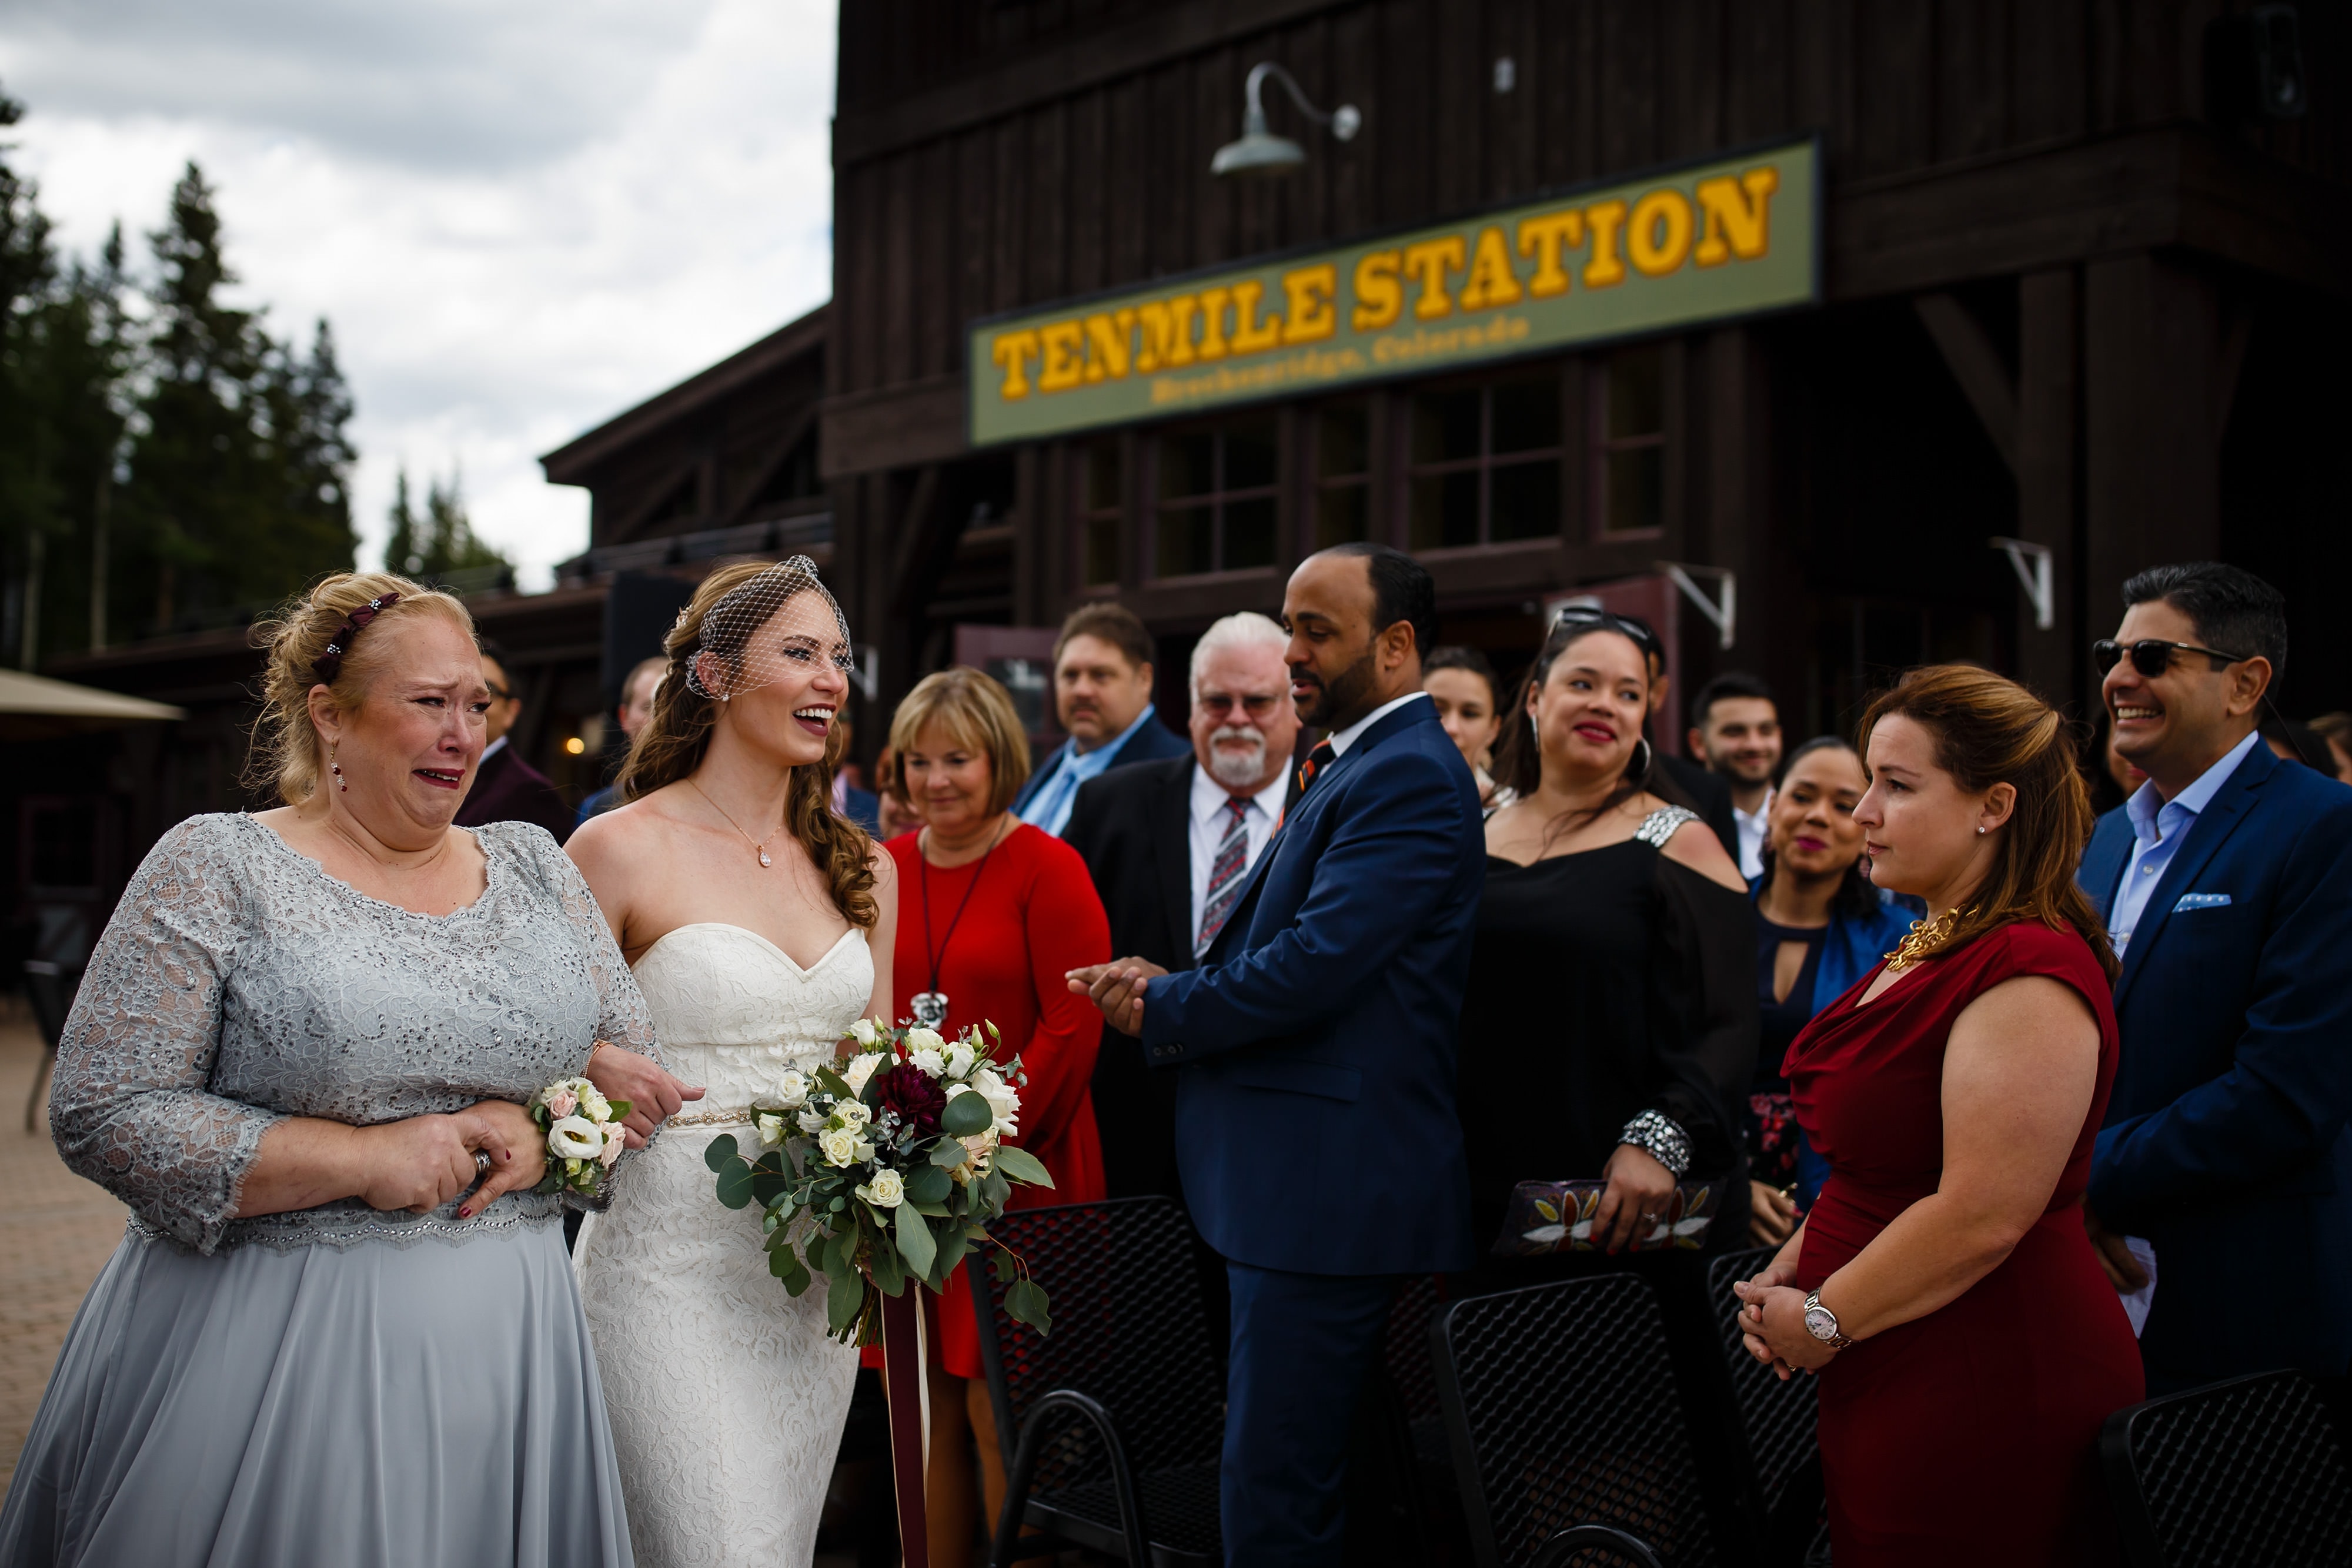 Sharon walks down the aisle with her mother during her TenMile Station wedding in Breckenridge on Peak 9